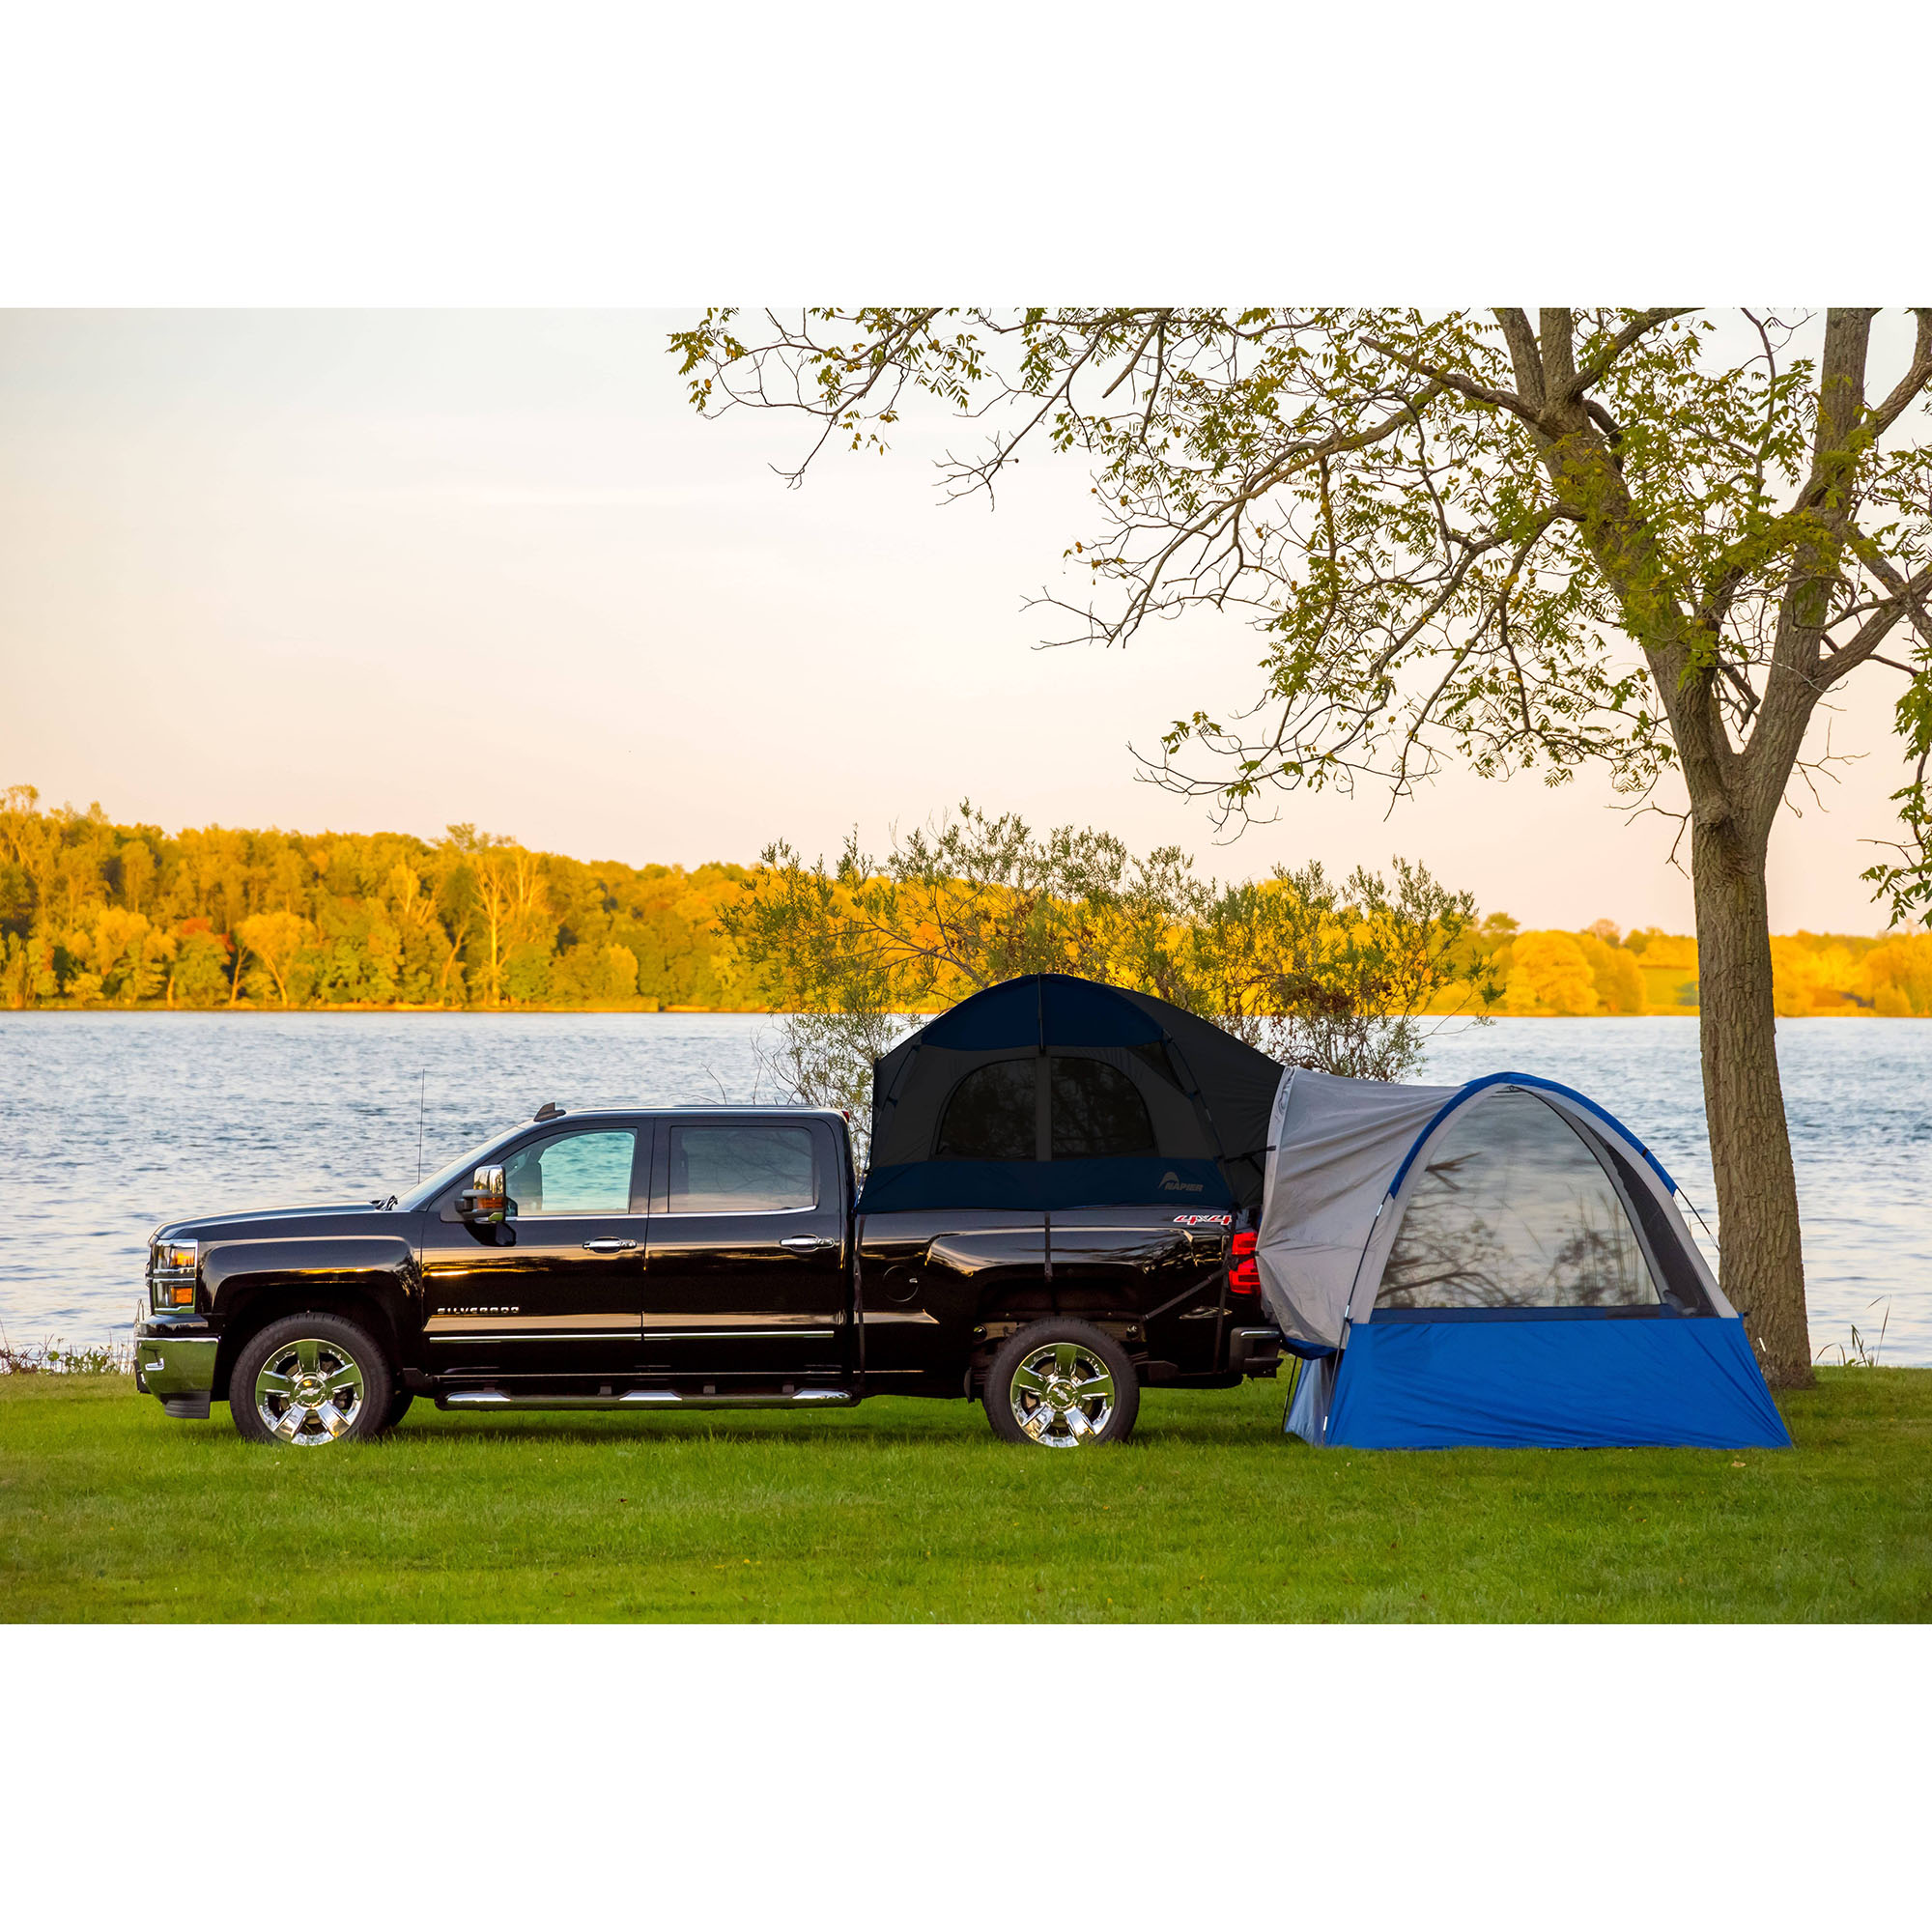 Napier Sportz Link Portable 4 Person Truck Bed Attachment Camping Tent, Blue - image 4 of 6